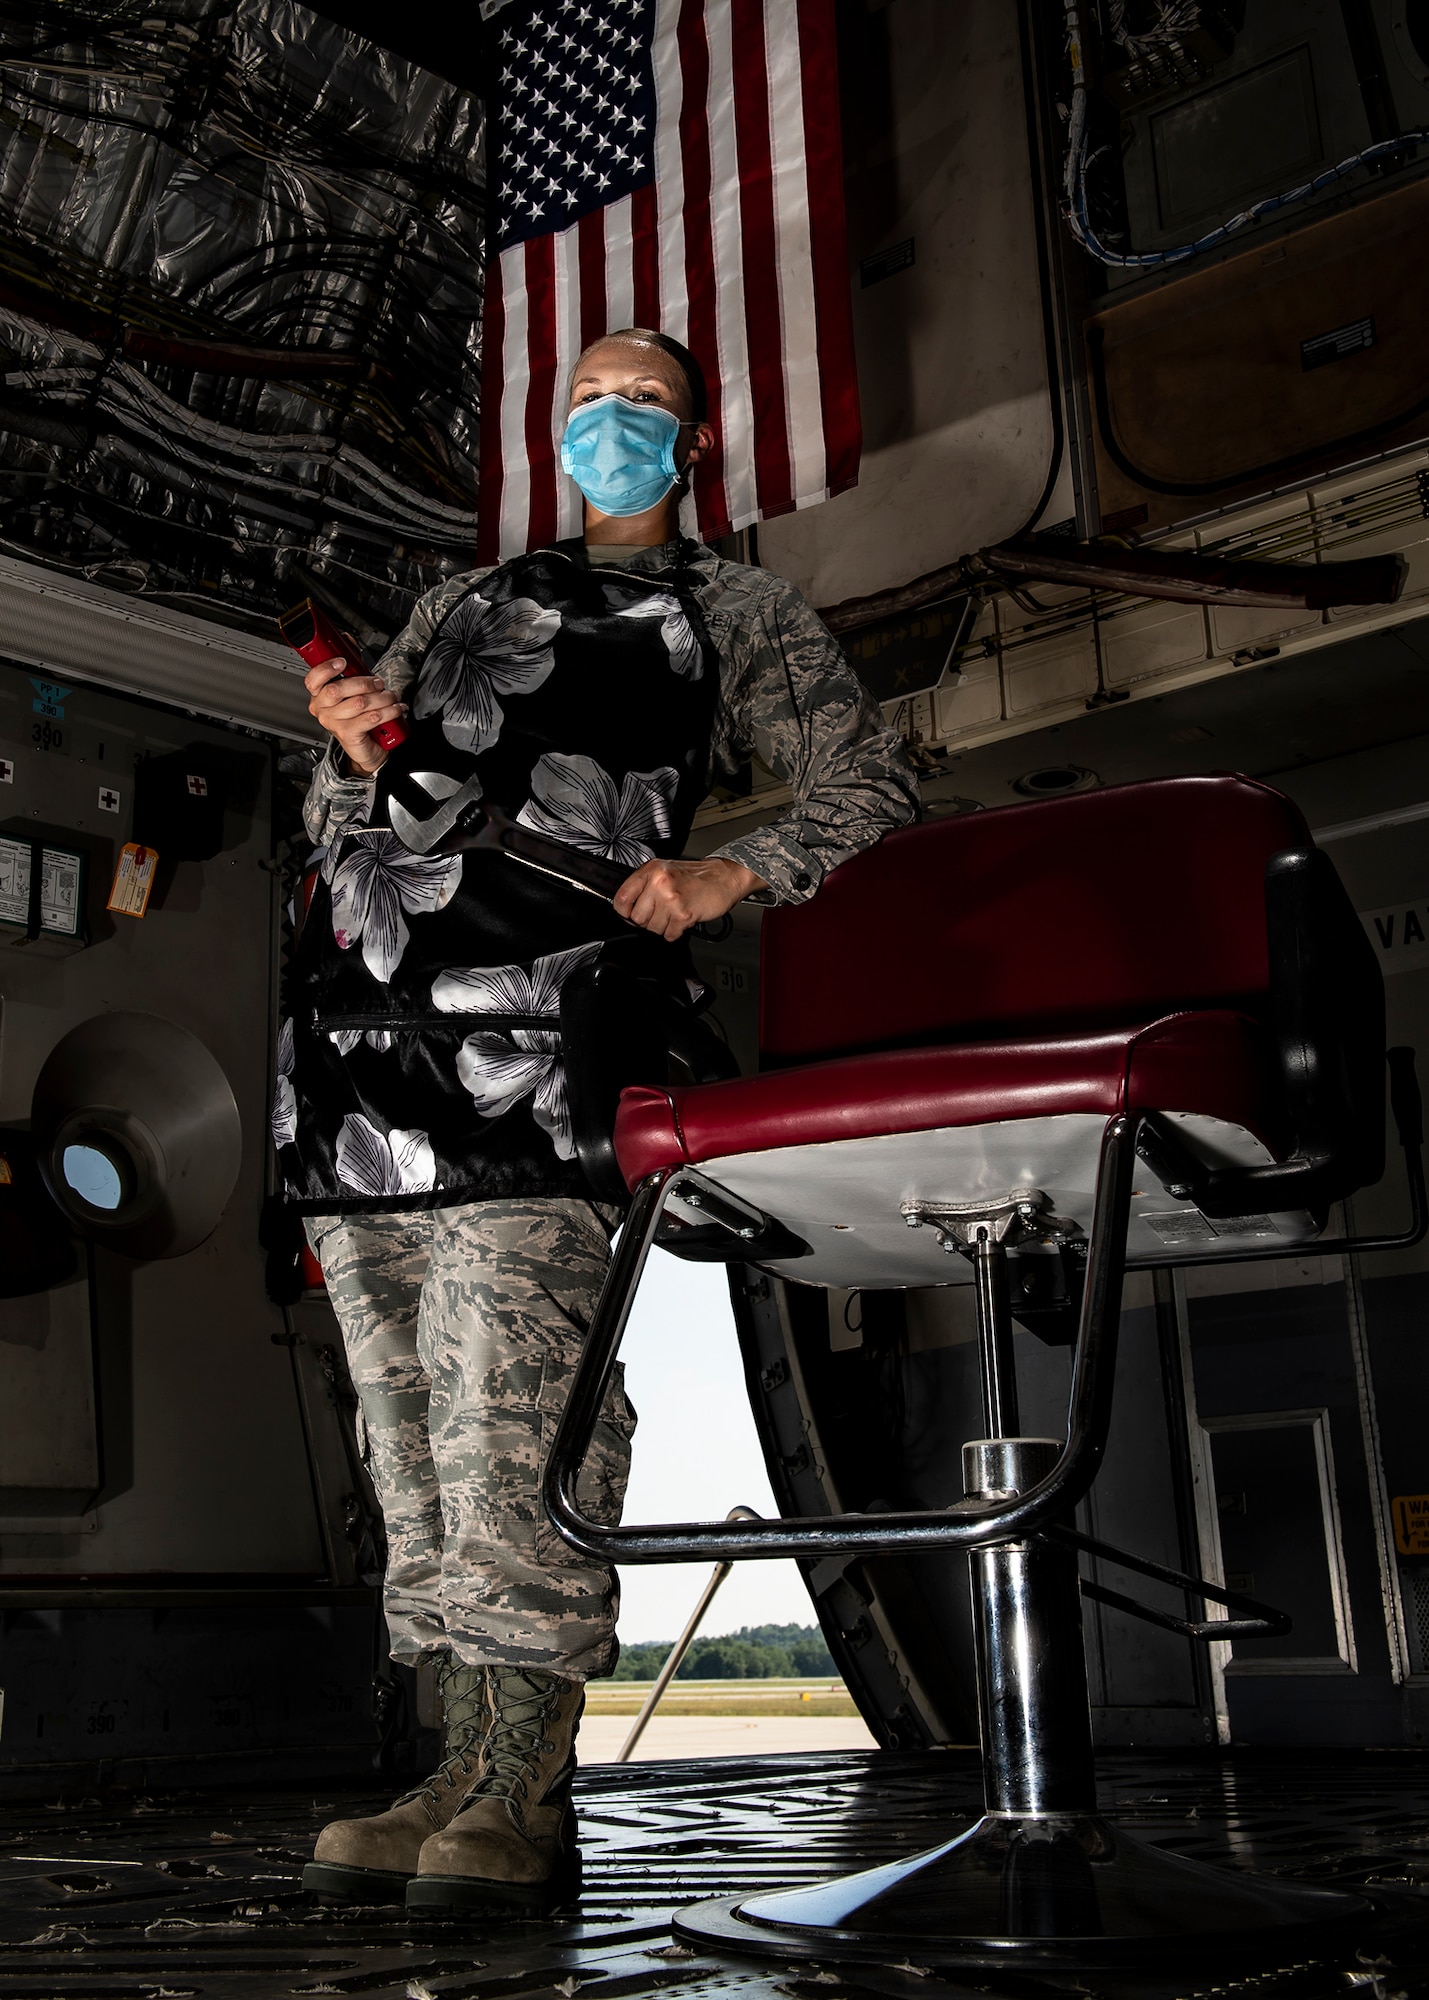 Senior Airman Sara Gutherie, 911th Aircraft Maintenance Squadron integrated flight control systems mechanic, poses for a photo inside a C-17 Globemaster III with a wrench and hair clippers while wearing an apron and personal protective equipment at the Pittsburgh International Airport Air Reserve Station, Pennsylvania, July 8, 2020. During COVID-19 restrictions, Gutherie helped her fellow Airmen by using her skills as a licensed cosmetologist to give them haircuts to ensure they stayed within regulations while taking donations for the Needy Airman Fund in return. (U.S. Air Force photo by Joshua J. Seybert)